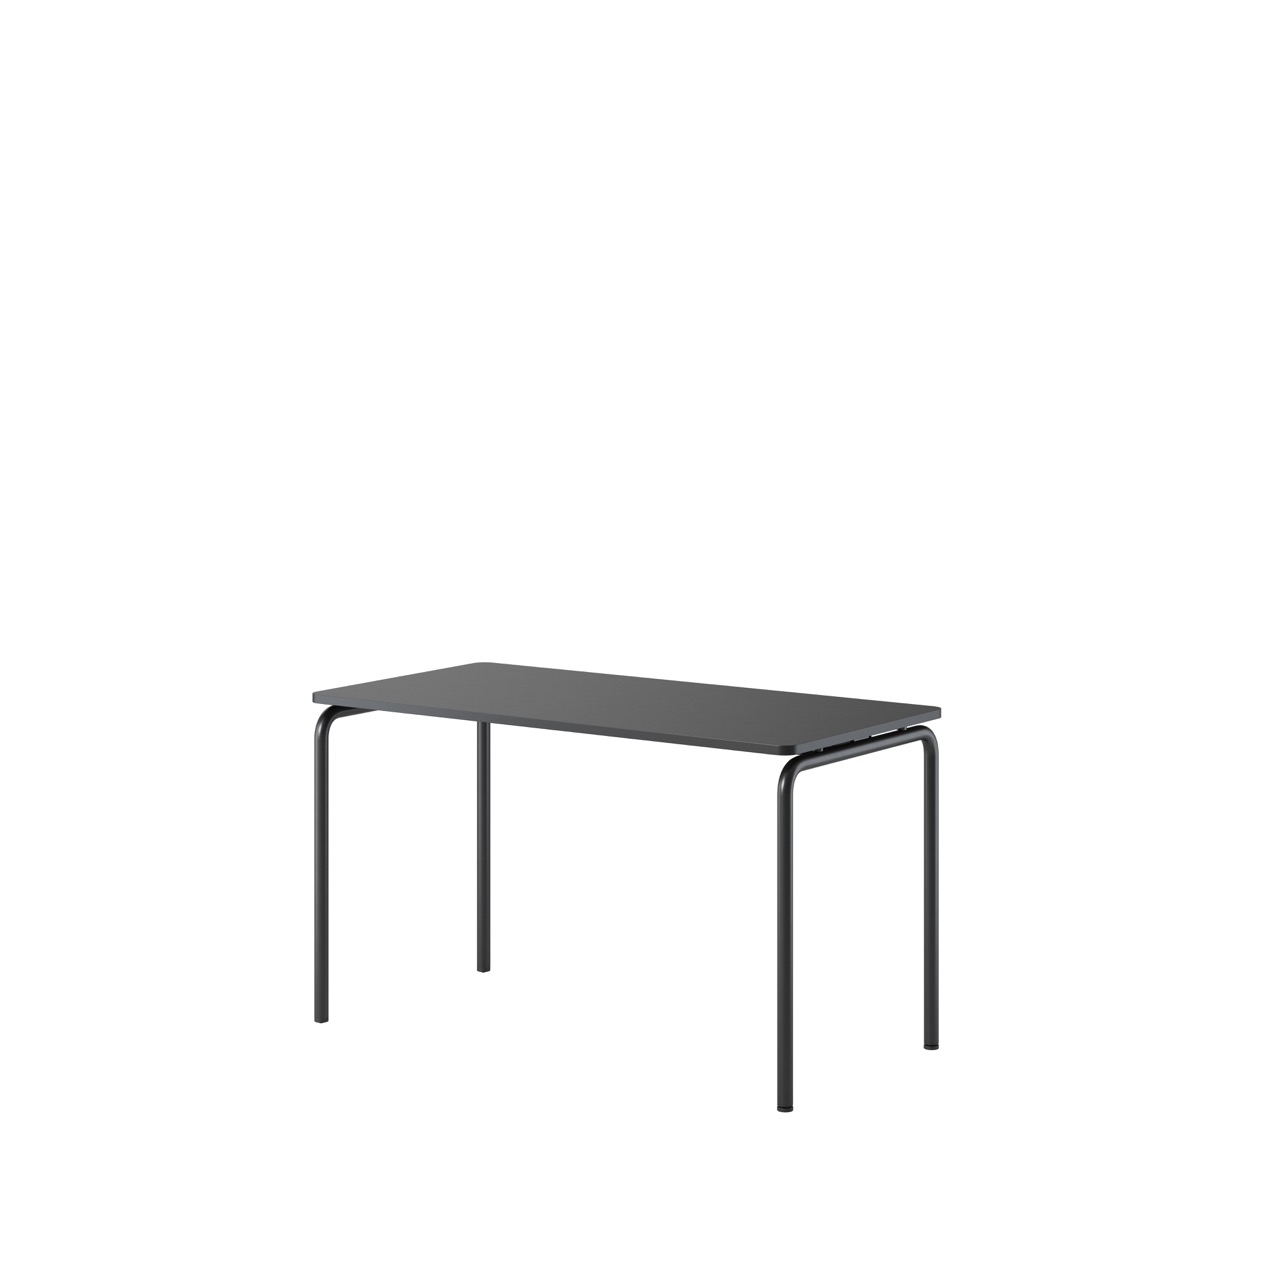 OCEE&FOUR - Tables - FourReal 74 - 128 x 64 - Straight - Packshot Image 3 Large